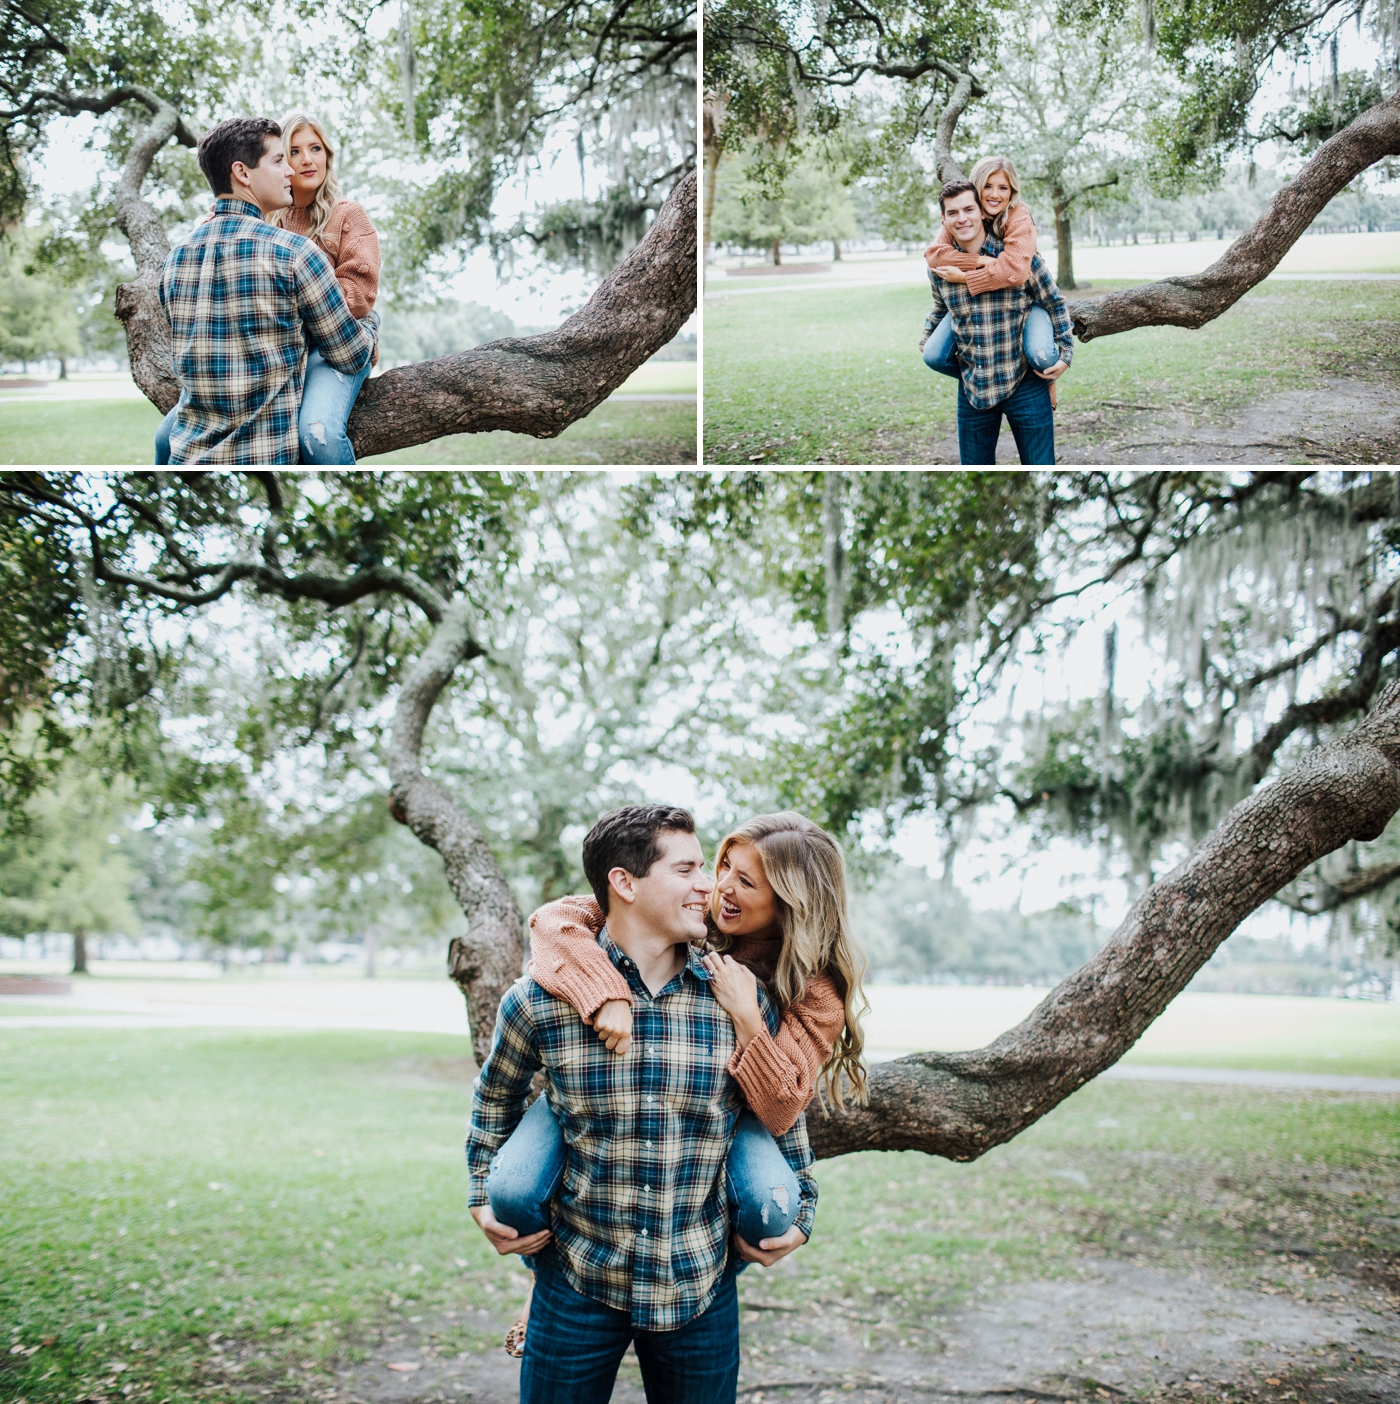 Macy & Matthew’s engagement session at Forsyth Park in Downtown Savannah | Izzy and Co.